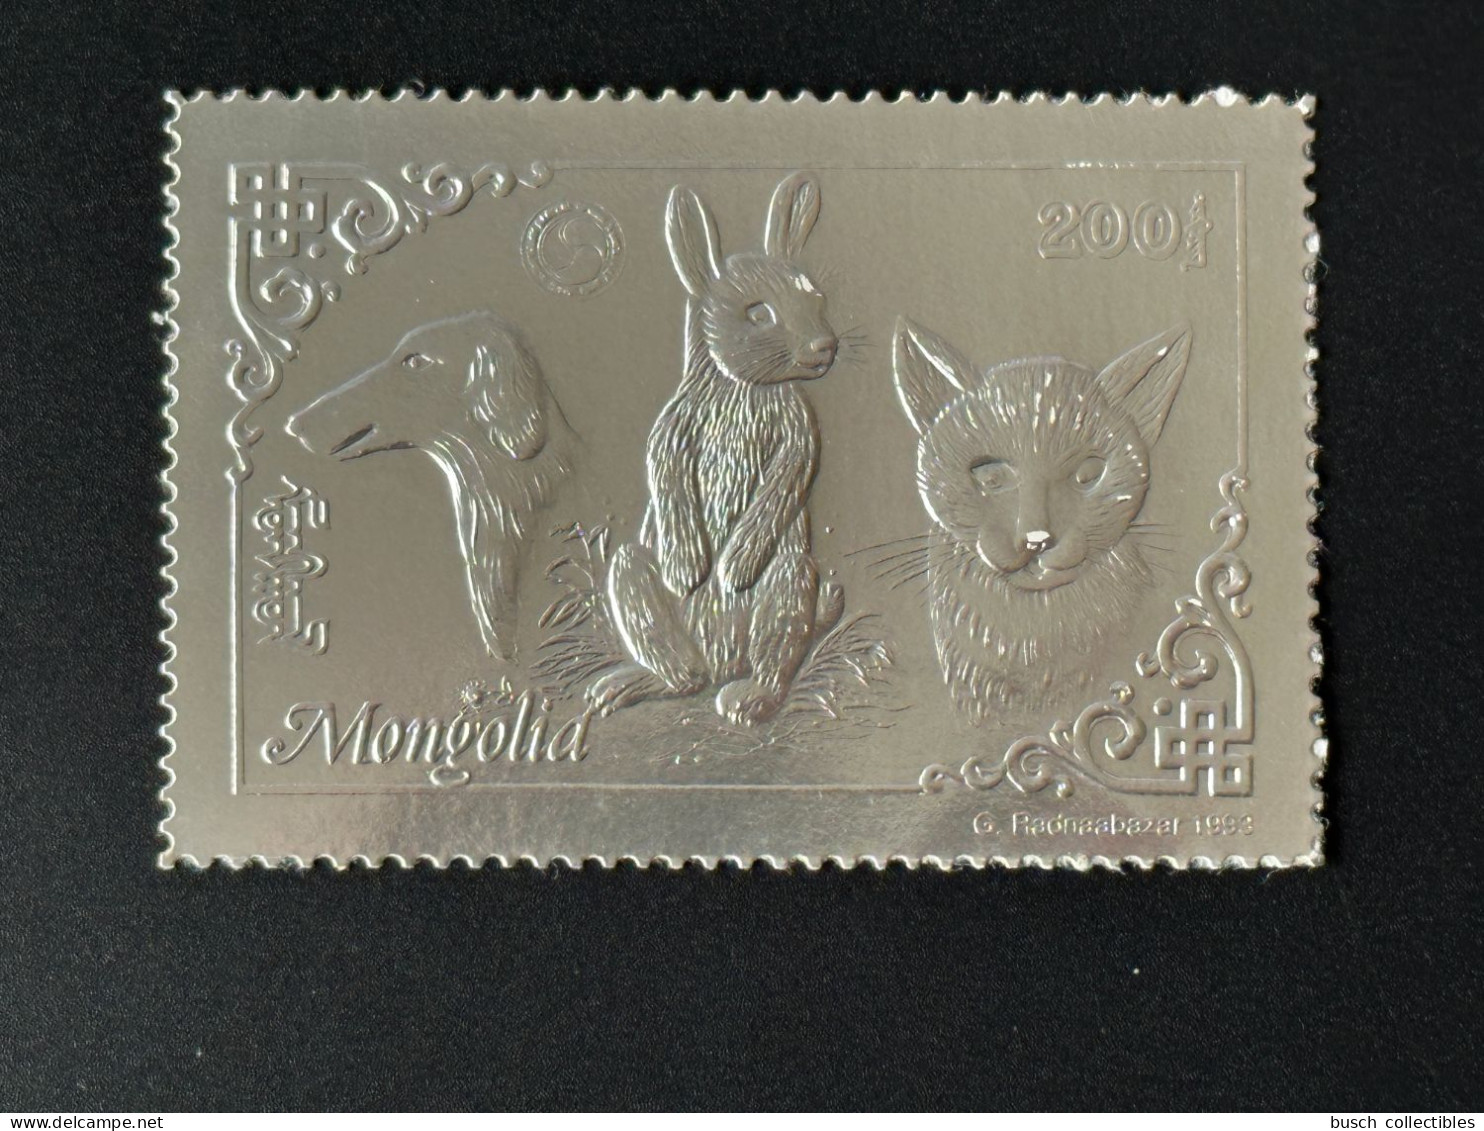 Mongolie Mongolia 1993 Mi. 2474 A Silver Argent Rotary Lions Chien Hund Dog Katze Cat Chat Lapin Rabbit Hase - Domestic Cats